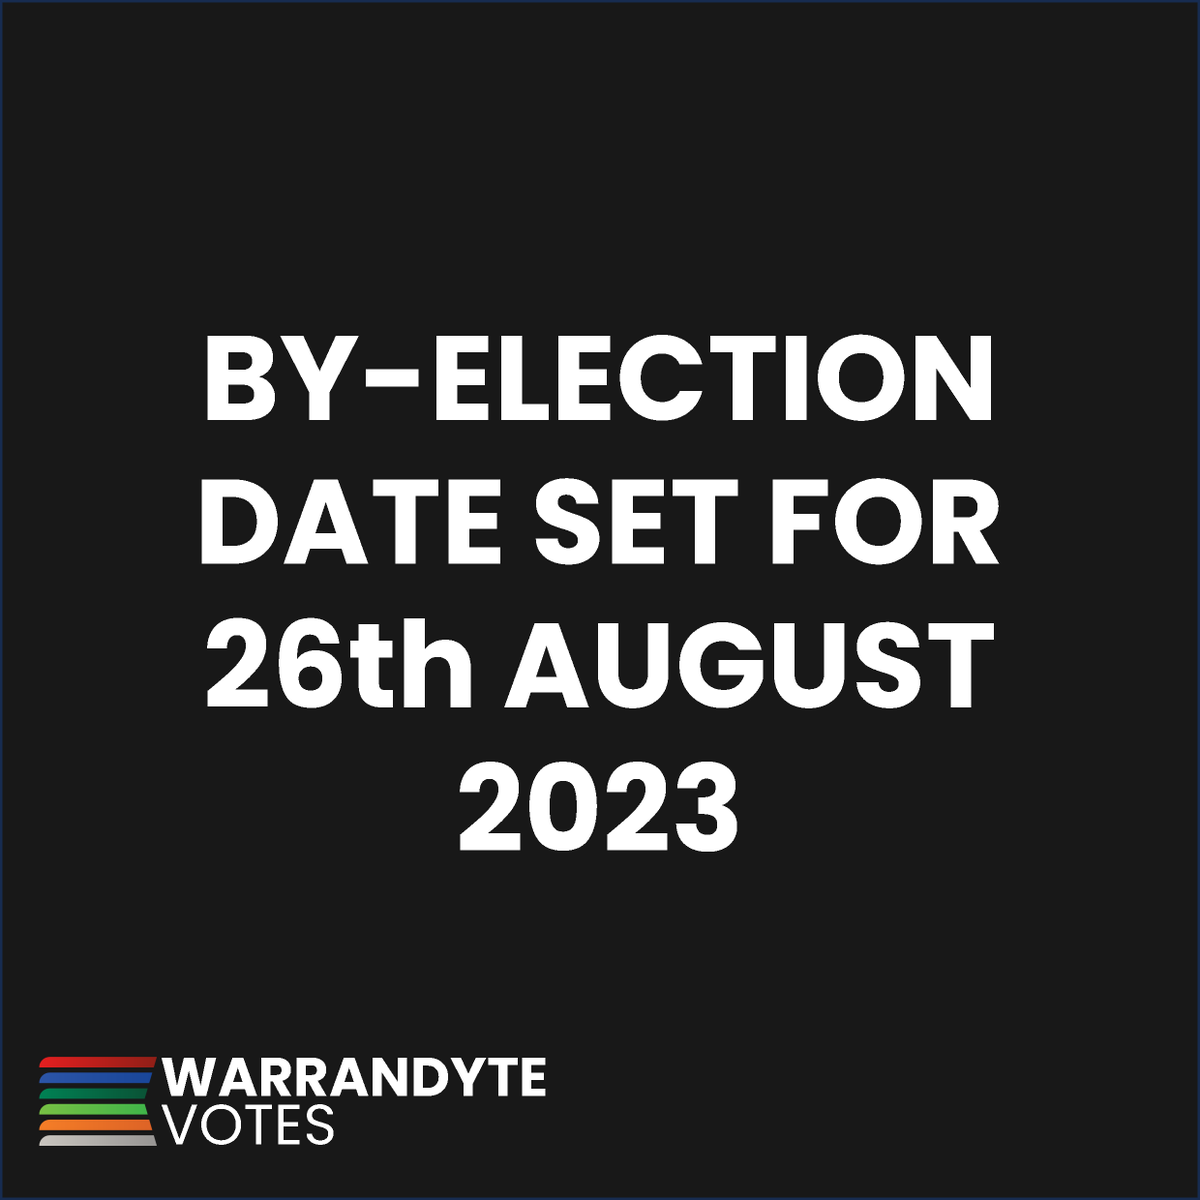 #WarrandyteVotes: The Date for the Warrandyte by-election has been set. READ MORE: sites.google.com/view/8newsvic/…